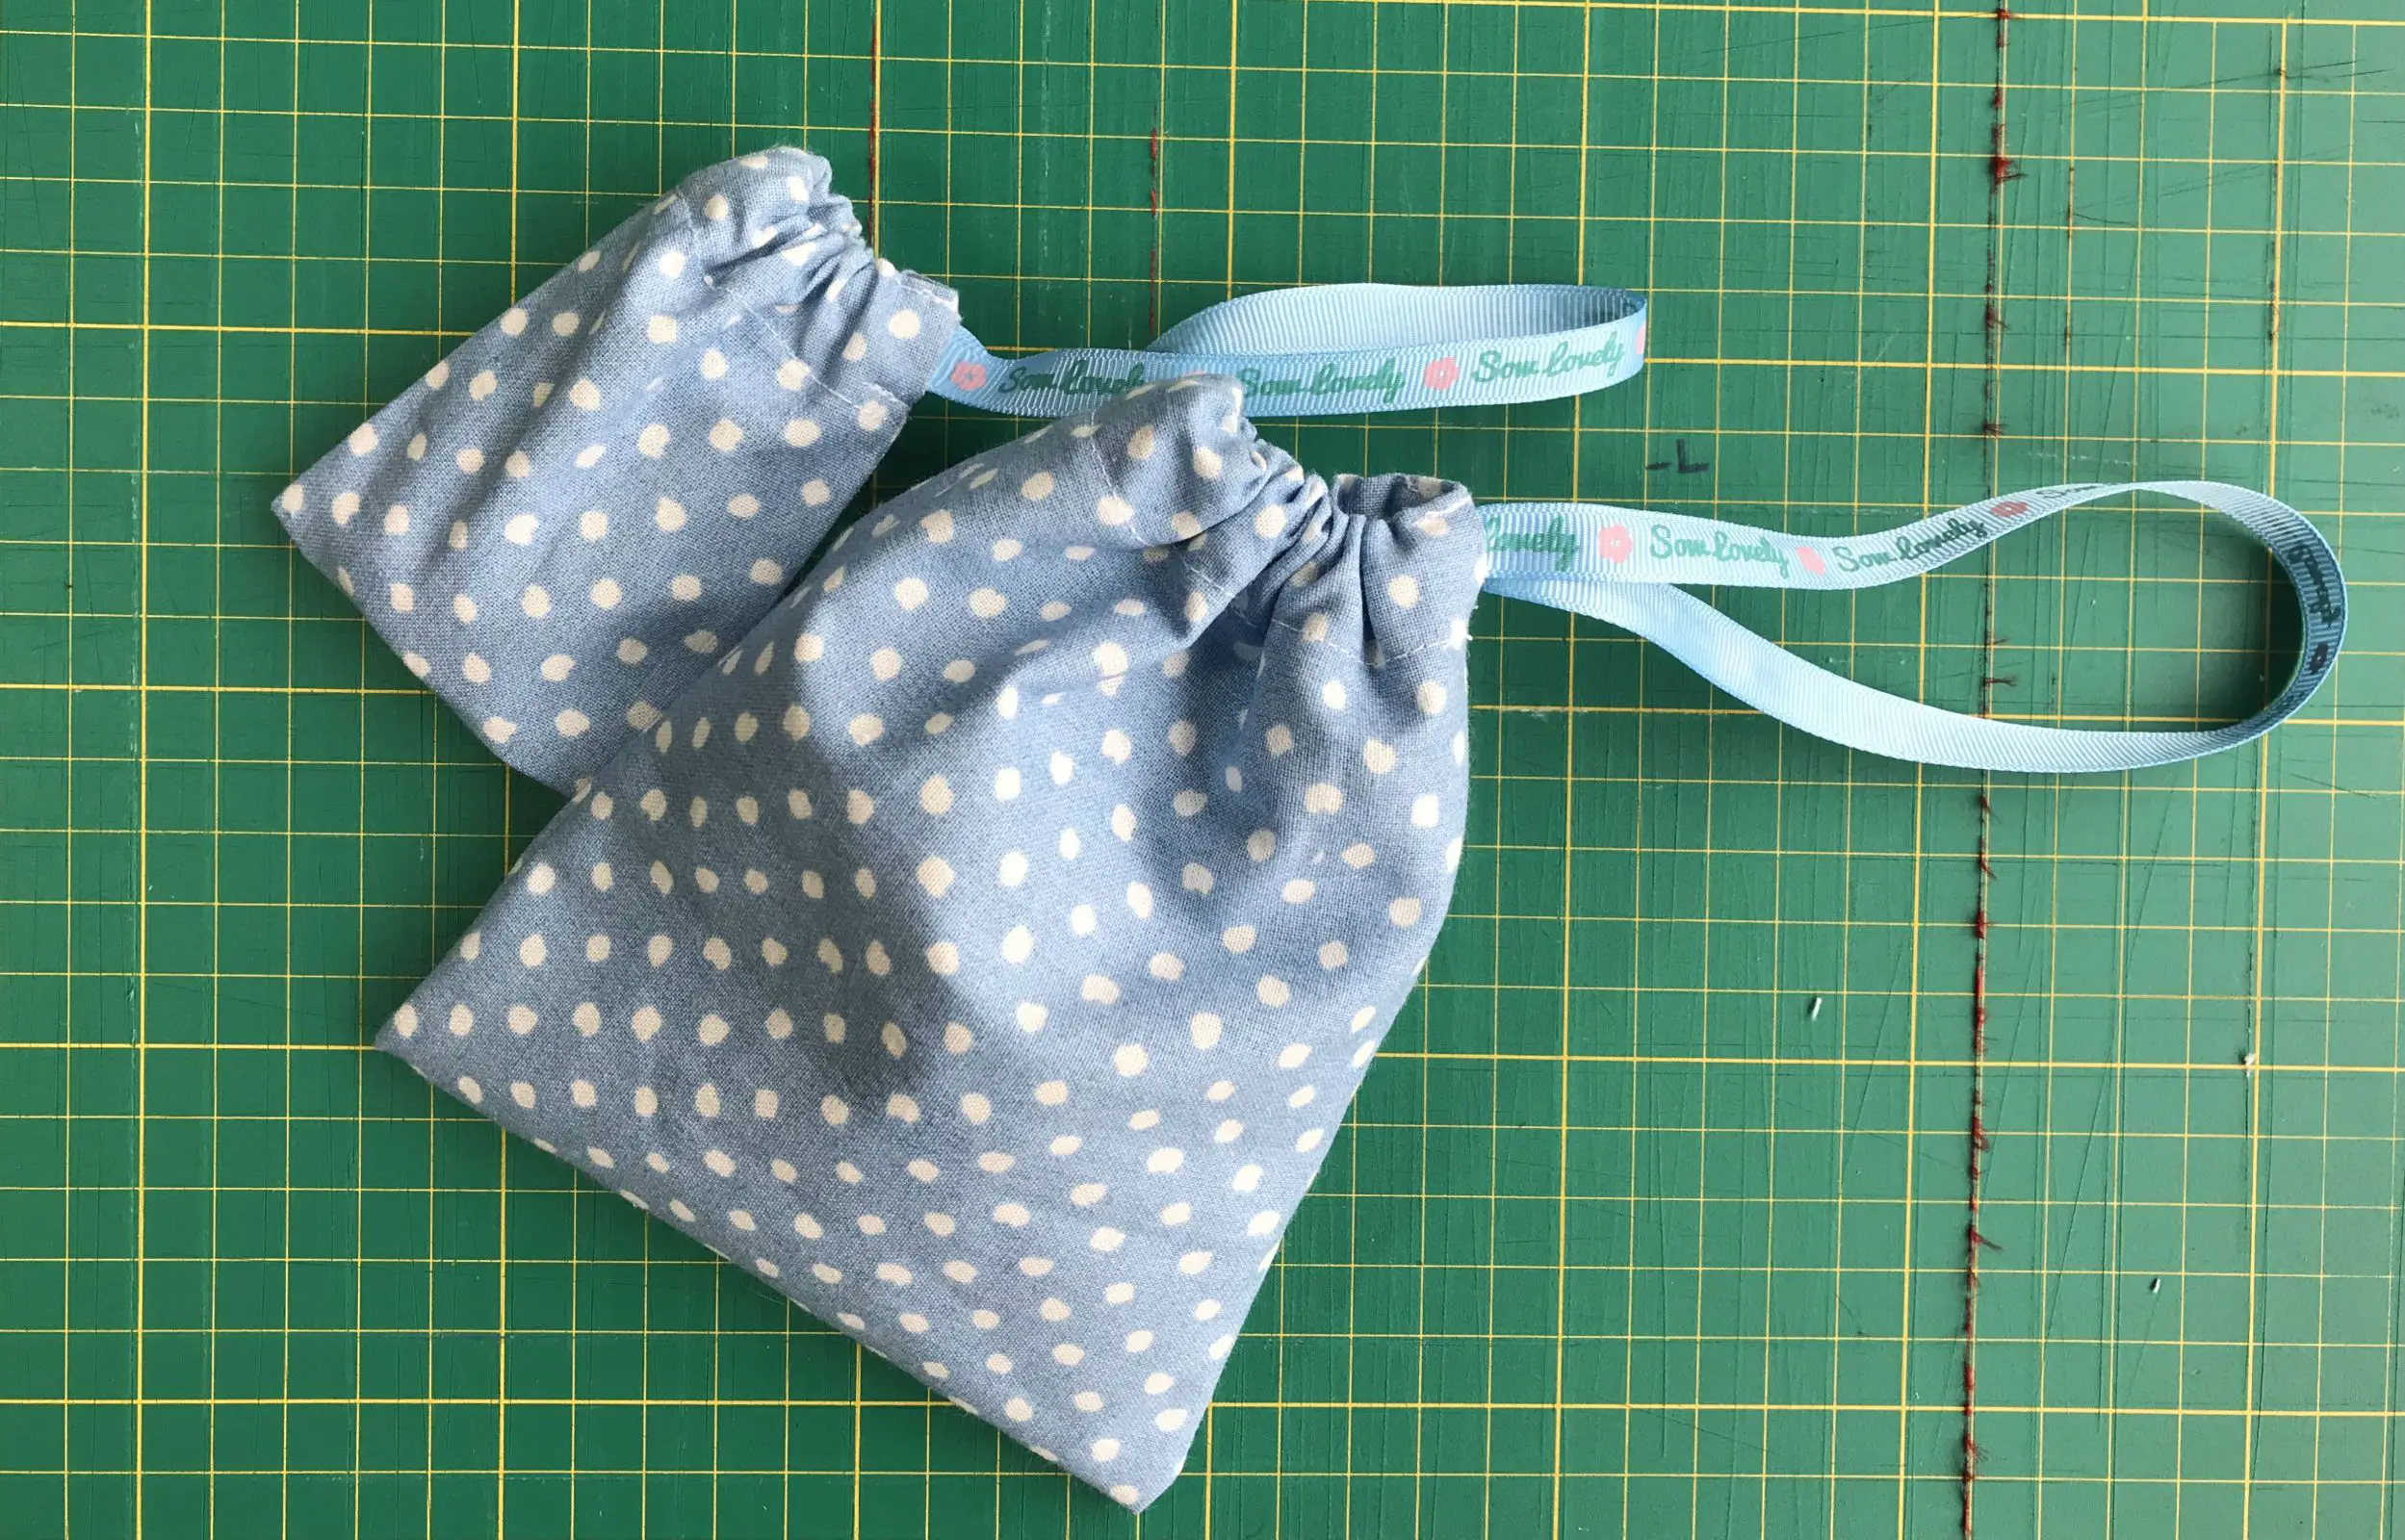 Two simple drawstring bags